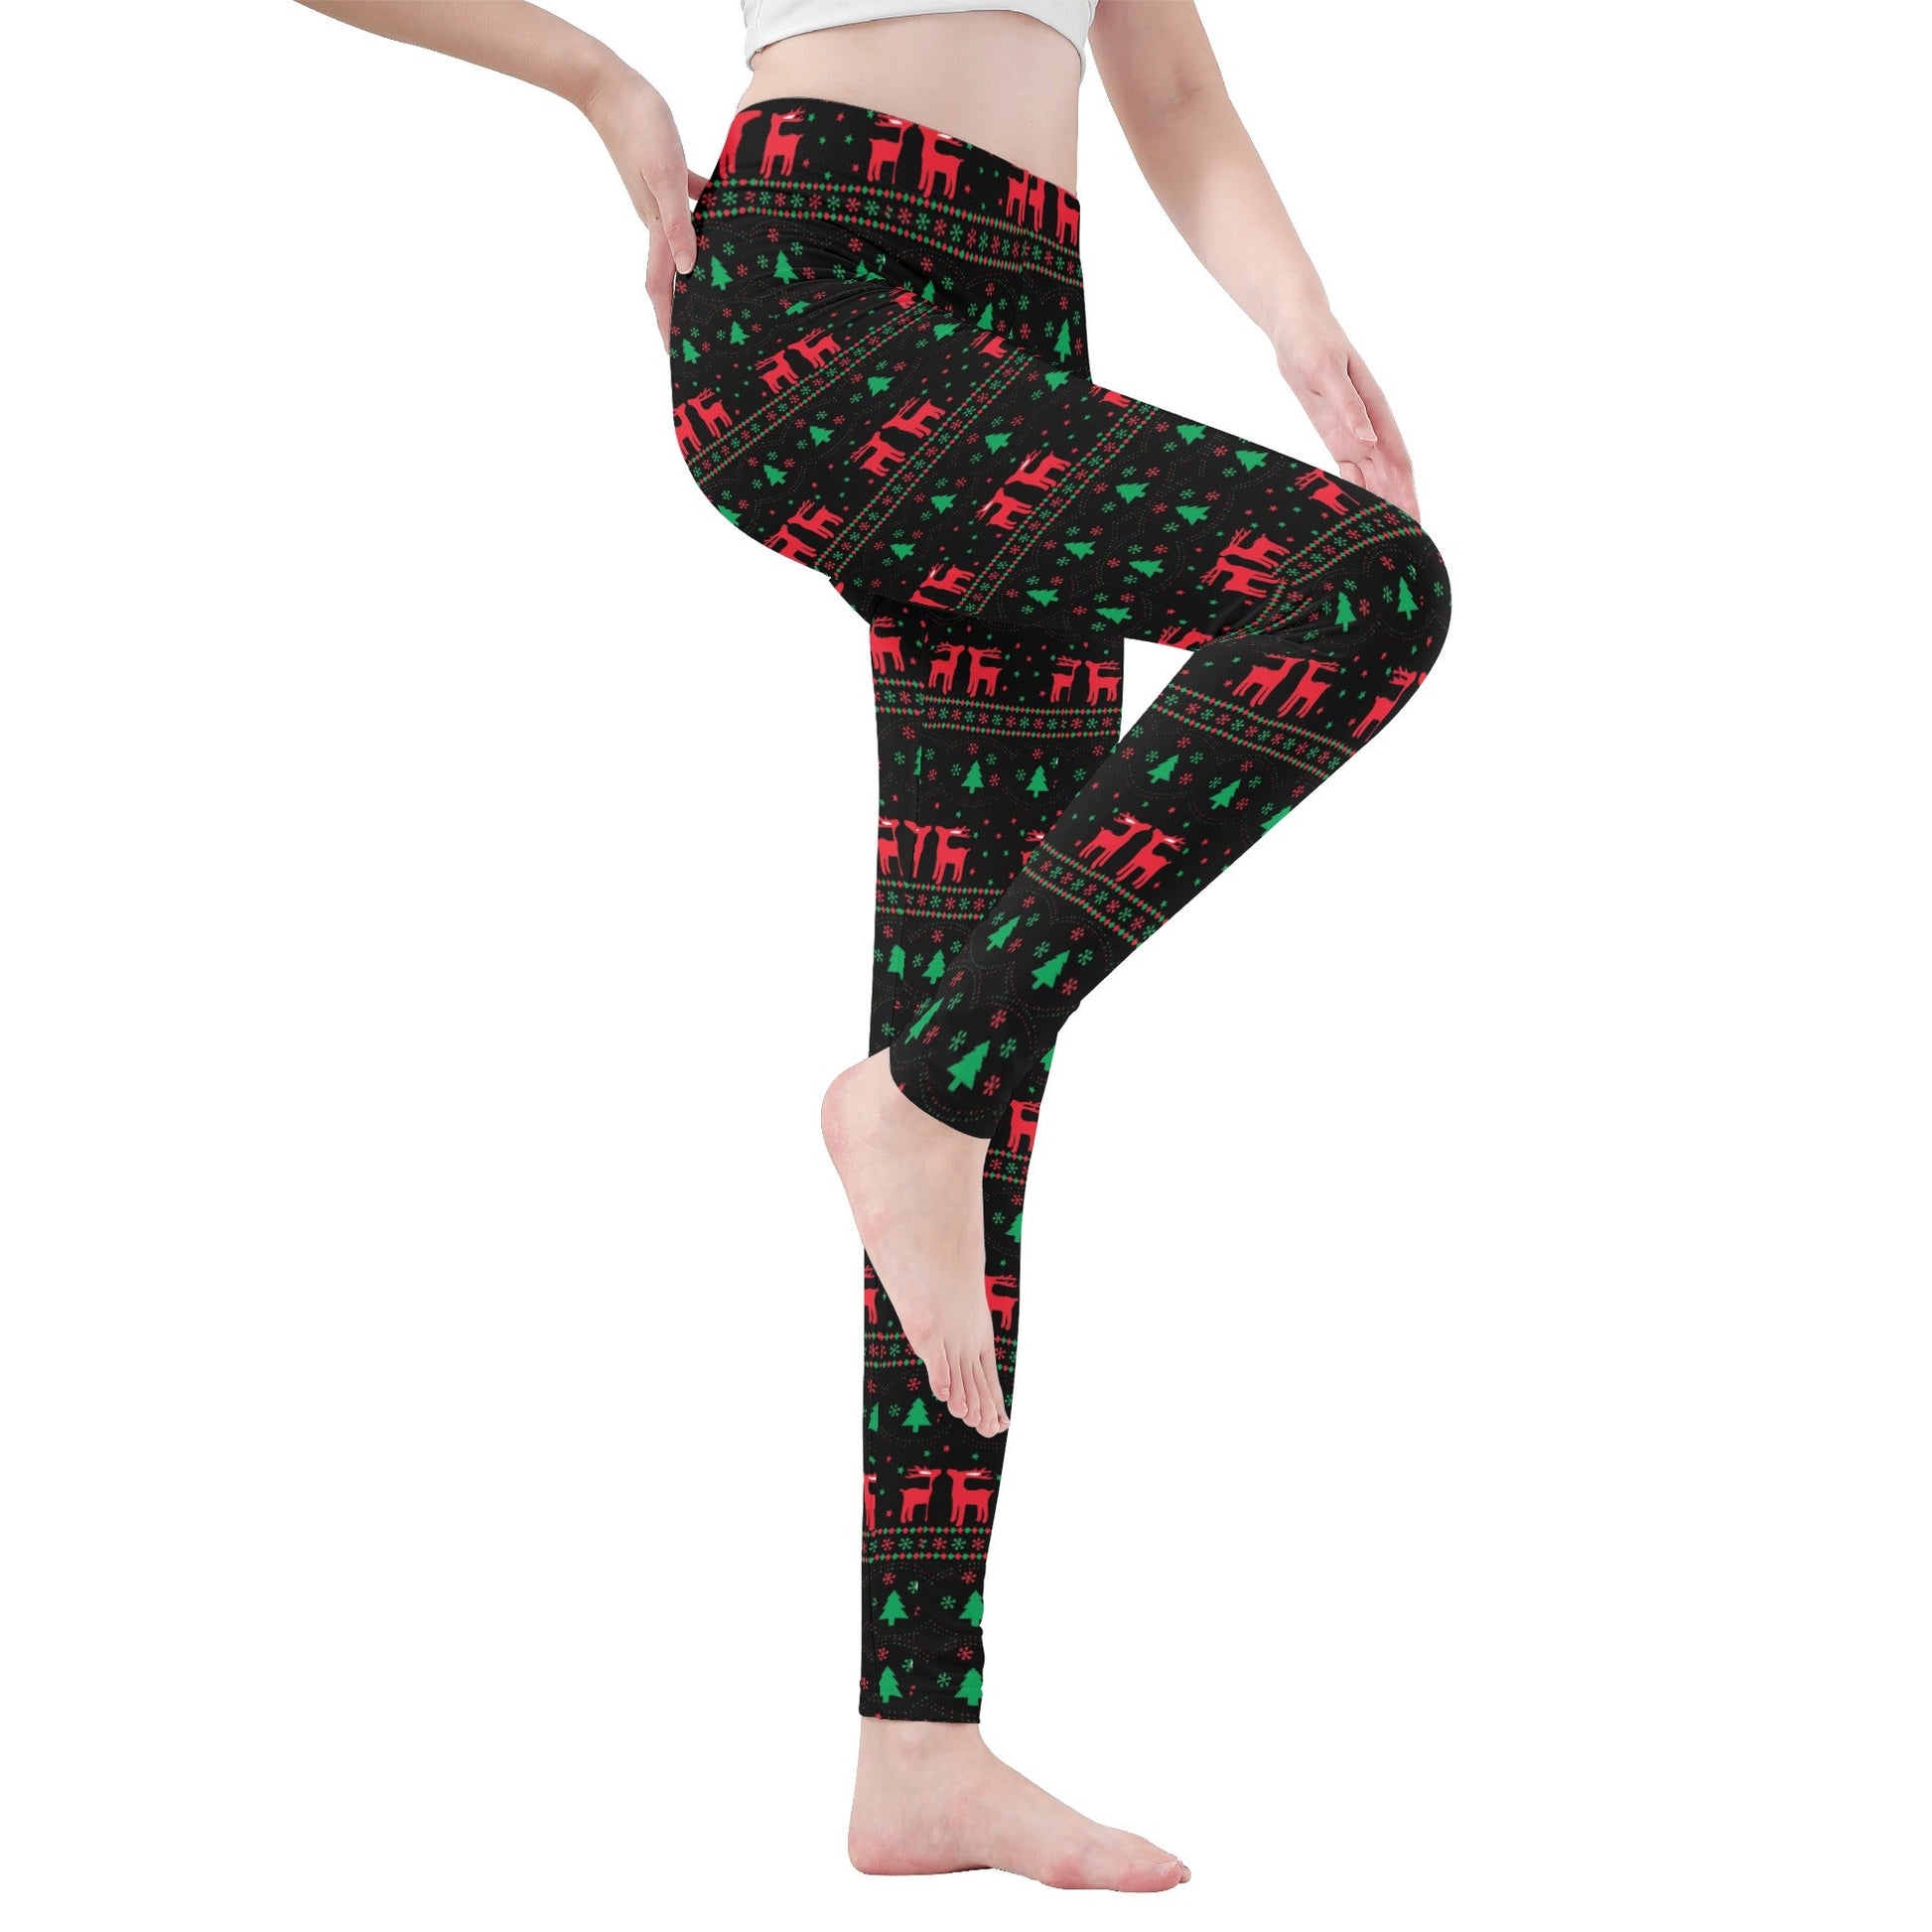 Stand out  with the  Nuggmas Womens Leggings  available at Hey Nugget. Grab yours today!